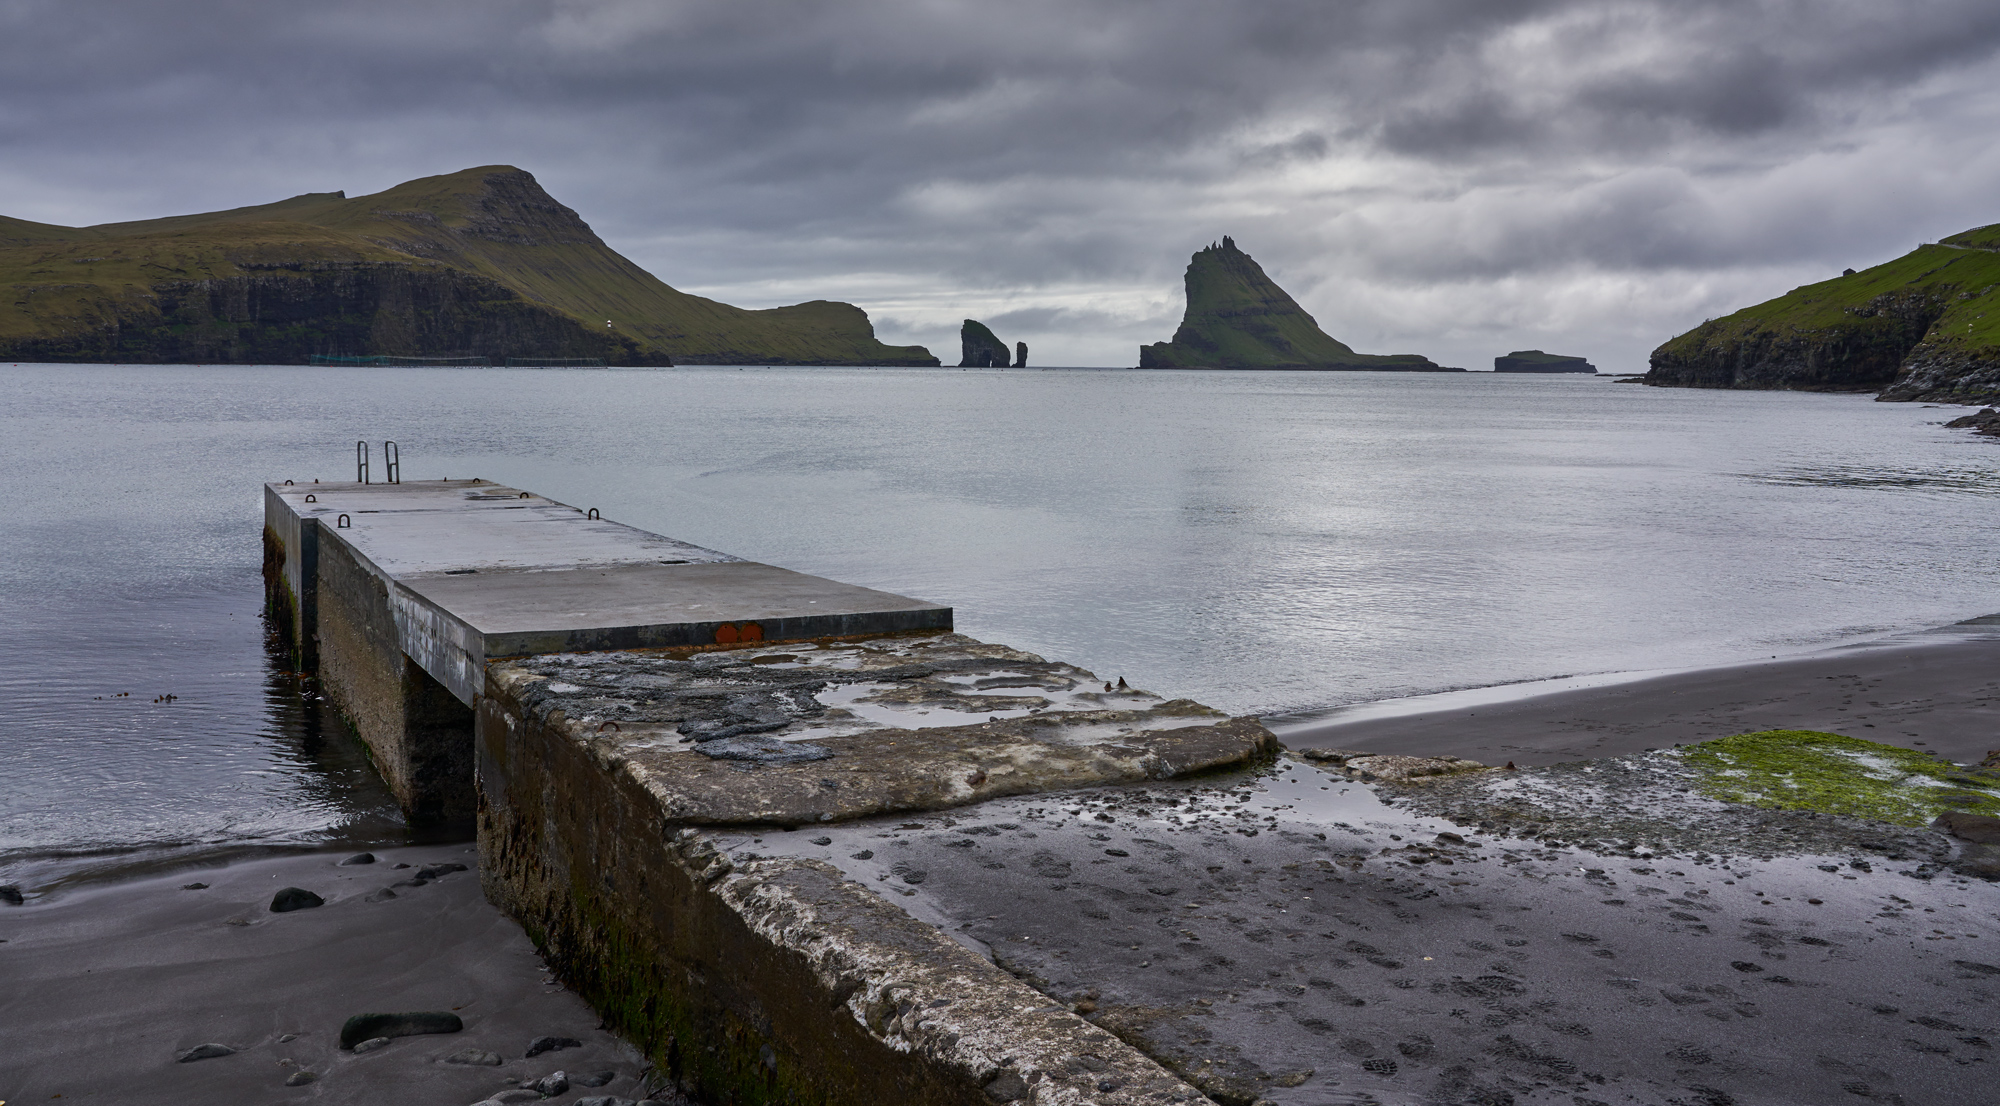 The lines work with this shot. The wharf fills in the dead space and carries your ey to hills. Thos sea stacks we will be traveling to by boat on this upcoming trip. I can't wait to see what we come up with.